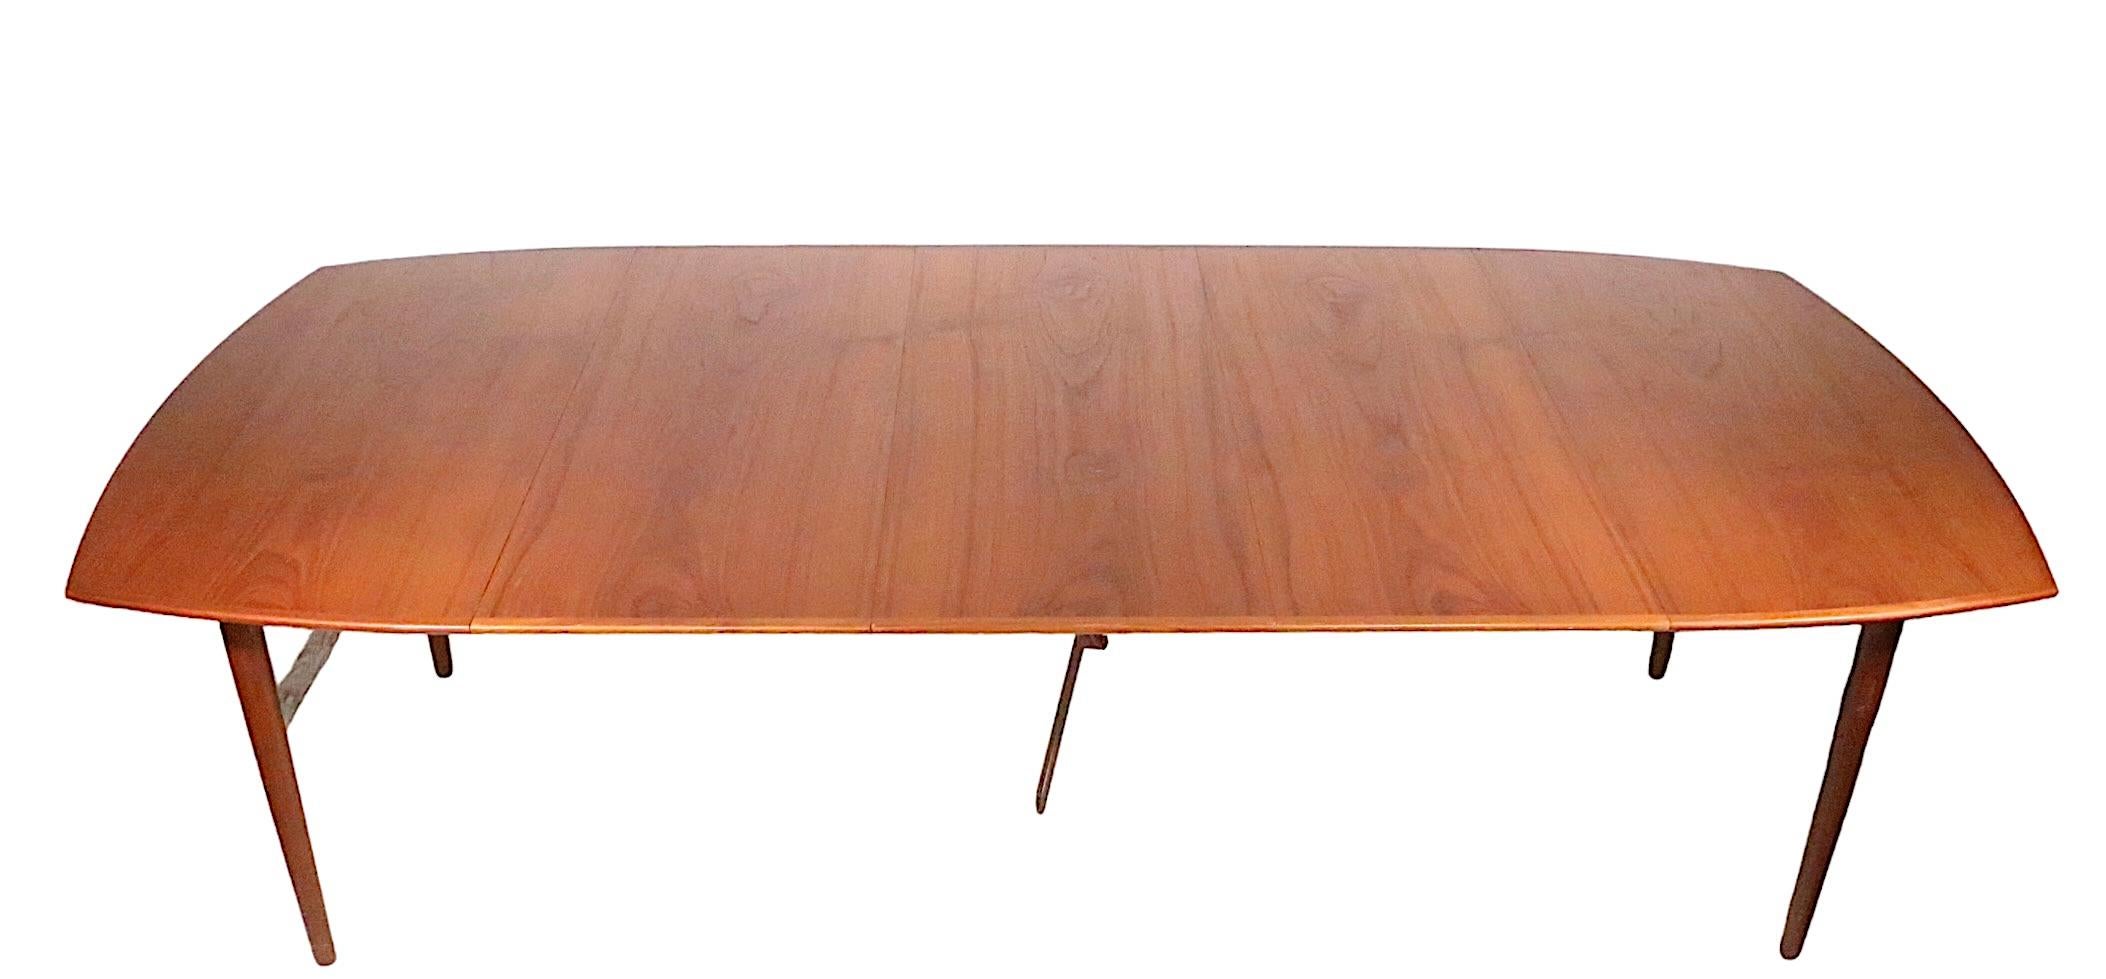 Danish Mid Century Modern Teak Extension  Dining Table by H W Klein  c 1950's For Sale 6